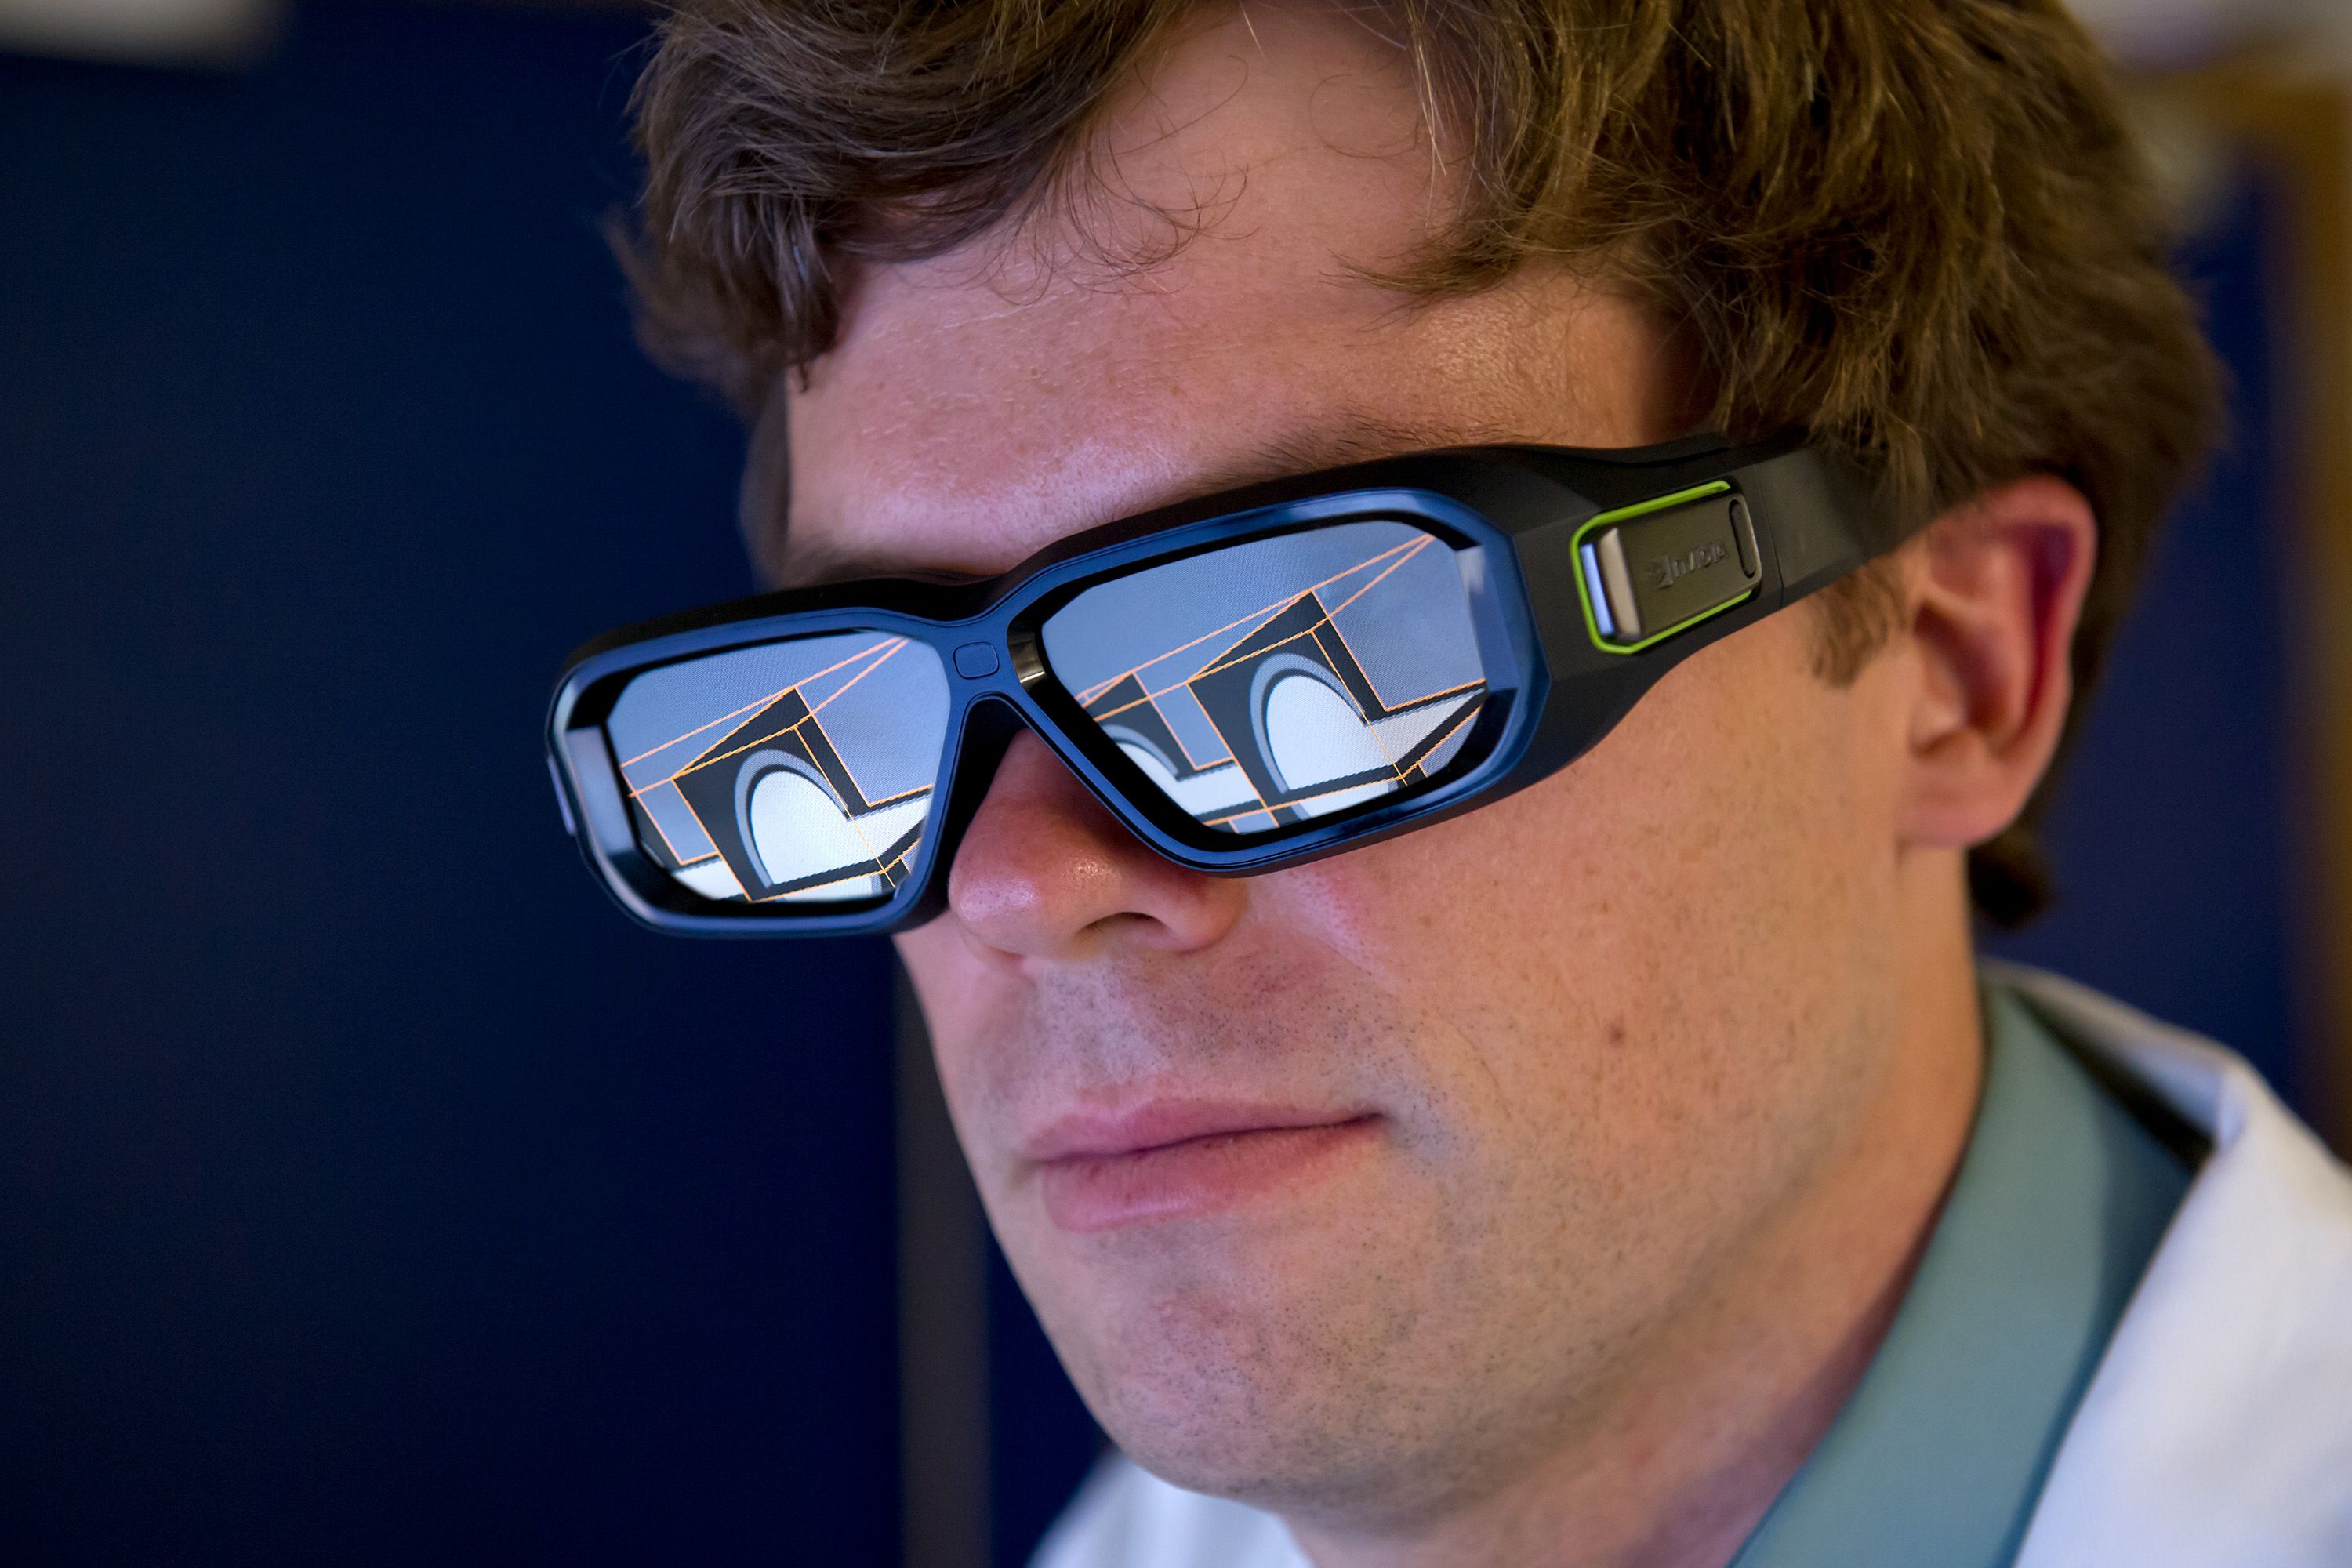 A man wearing big googles, on the lenses of which we see the bright lines and shapes of a computer visualisation